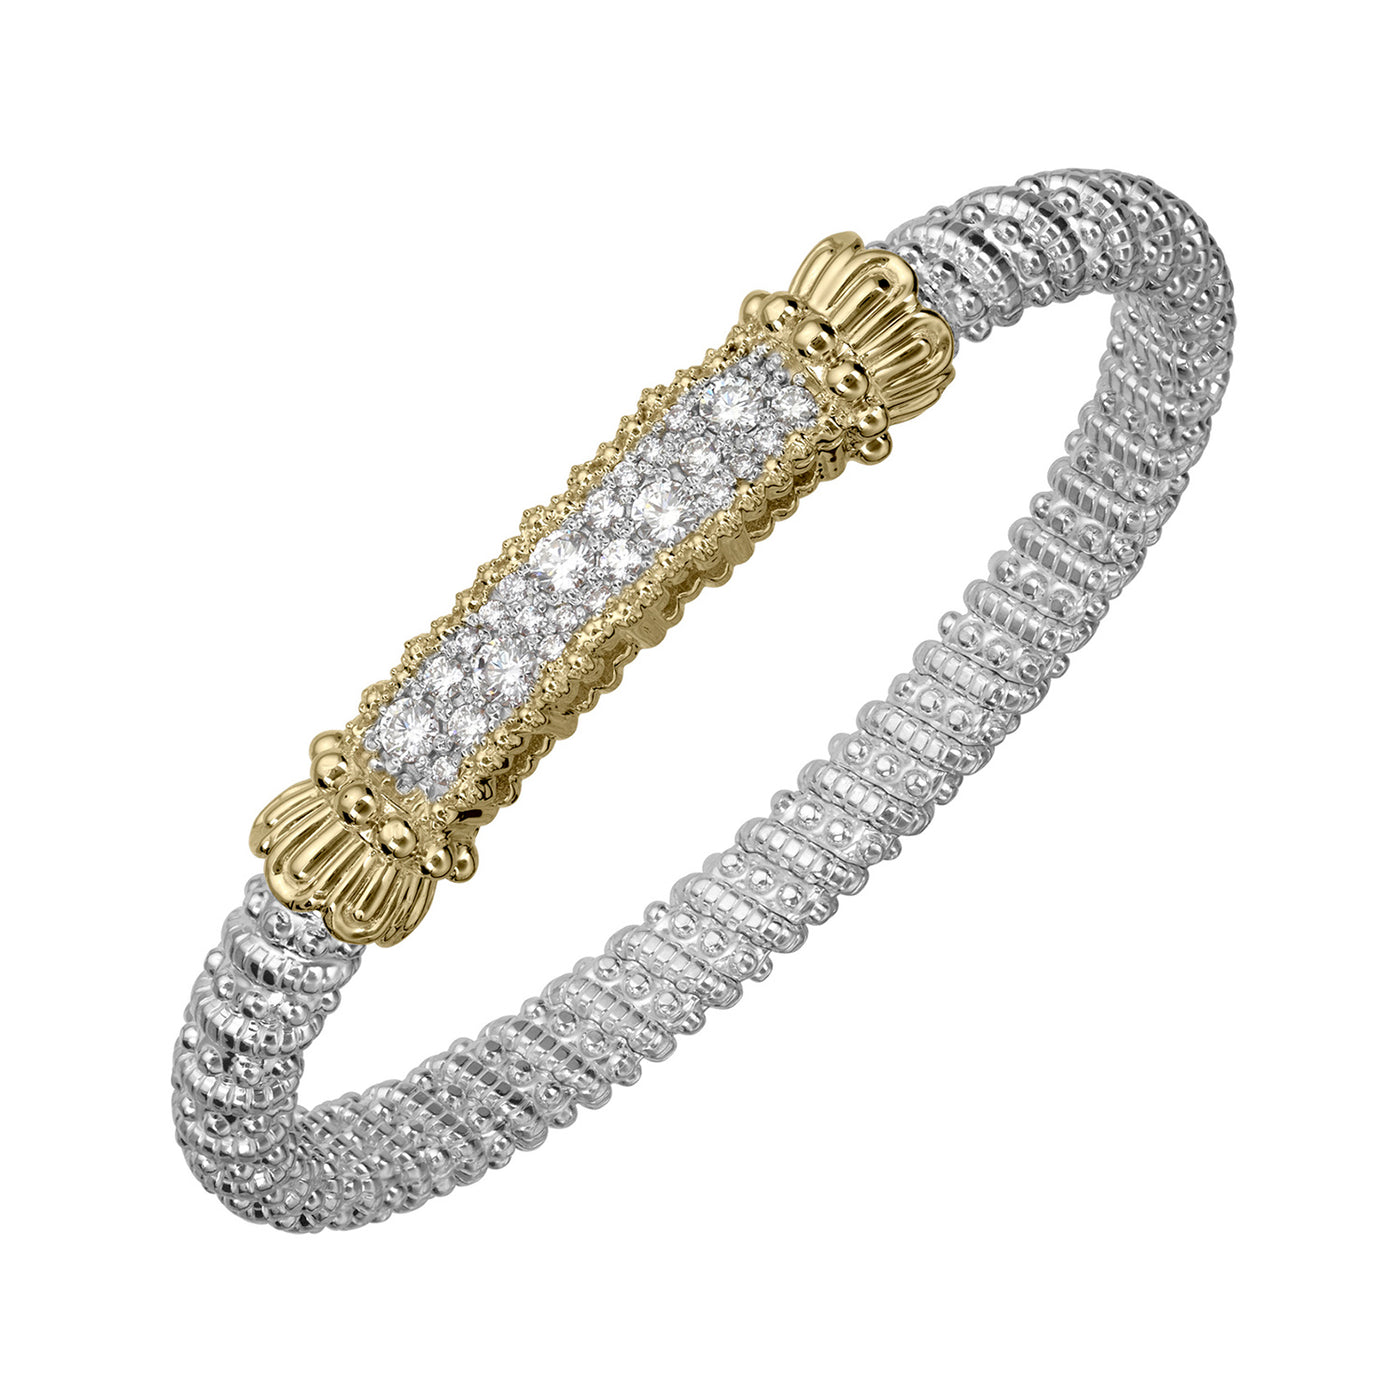 Vahan Sterling Silver and 14k Yellow Gold Moiré Beaded® Bangle Bracelet with Diamonds – 23452D06